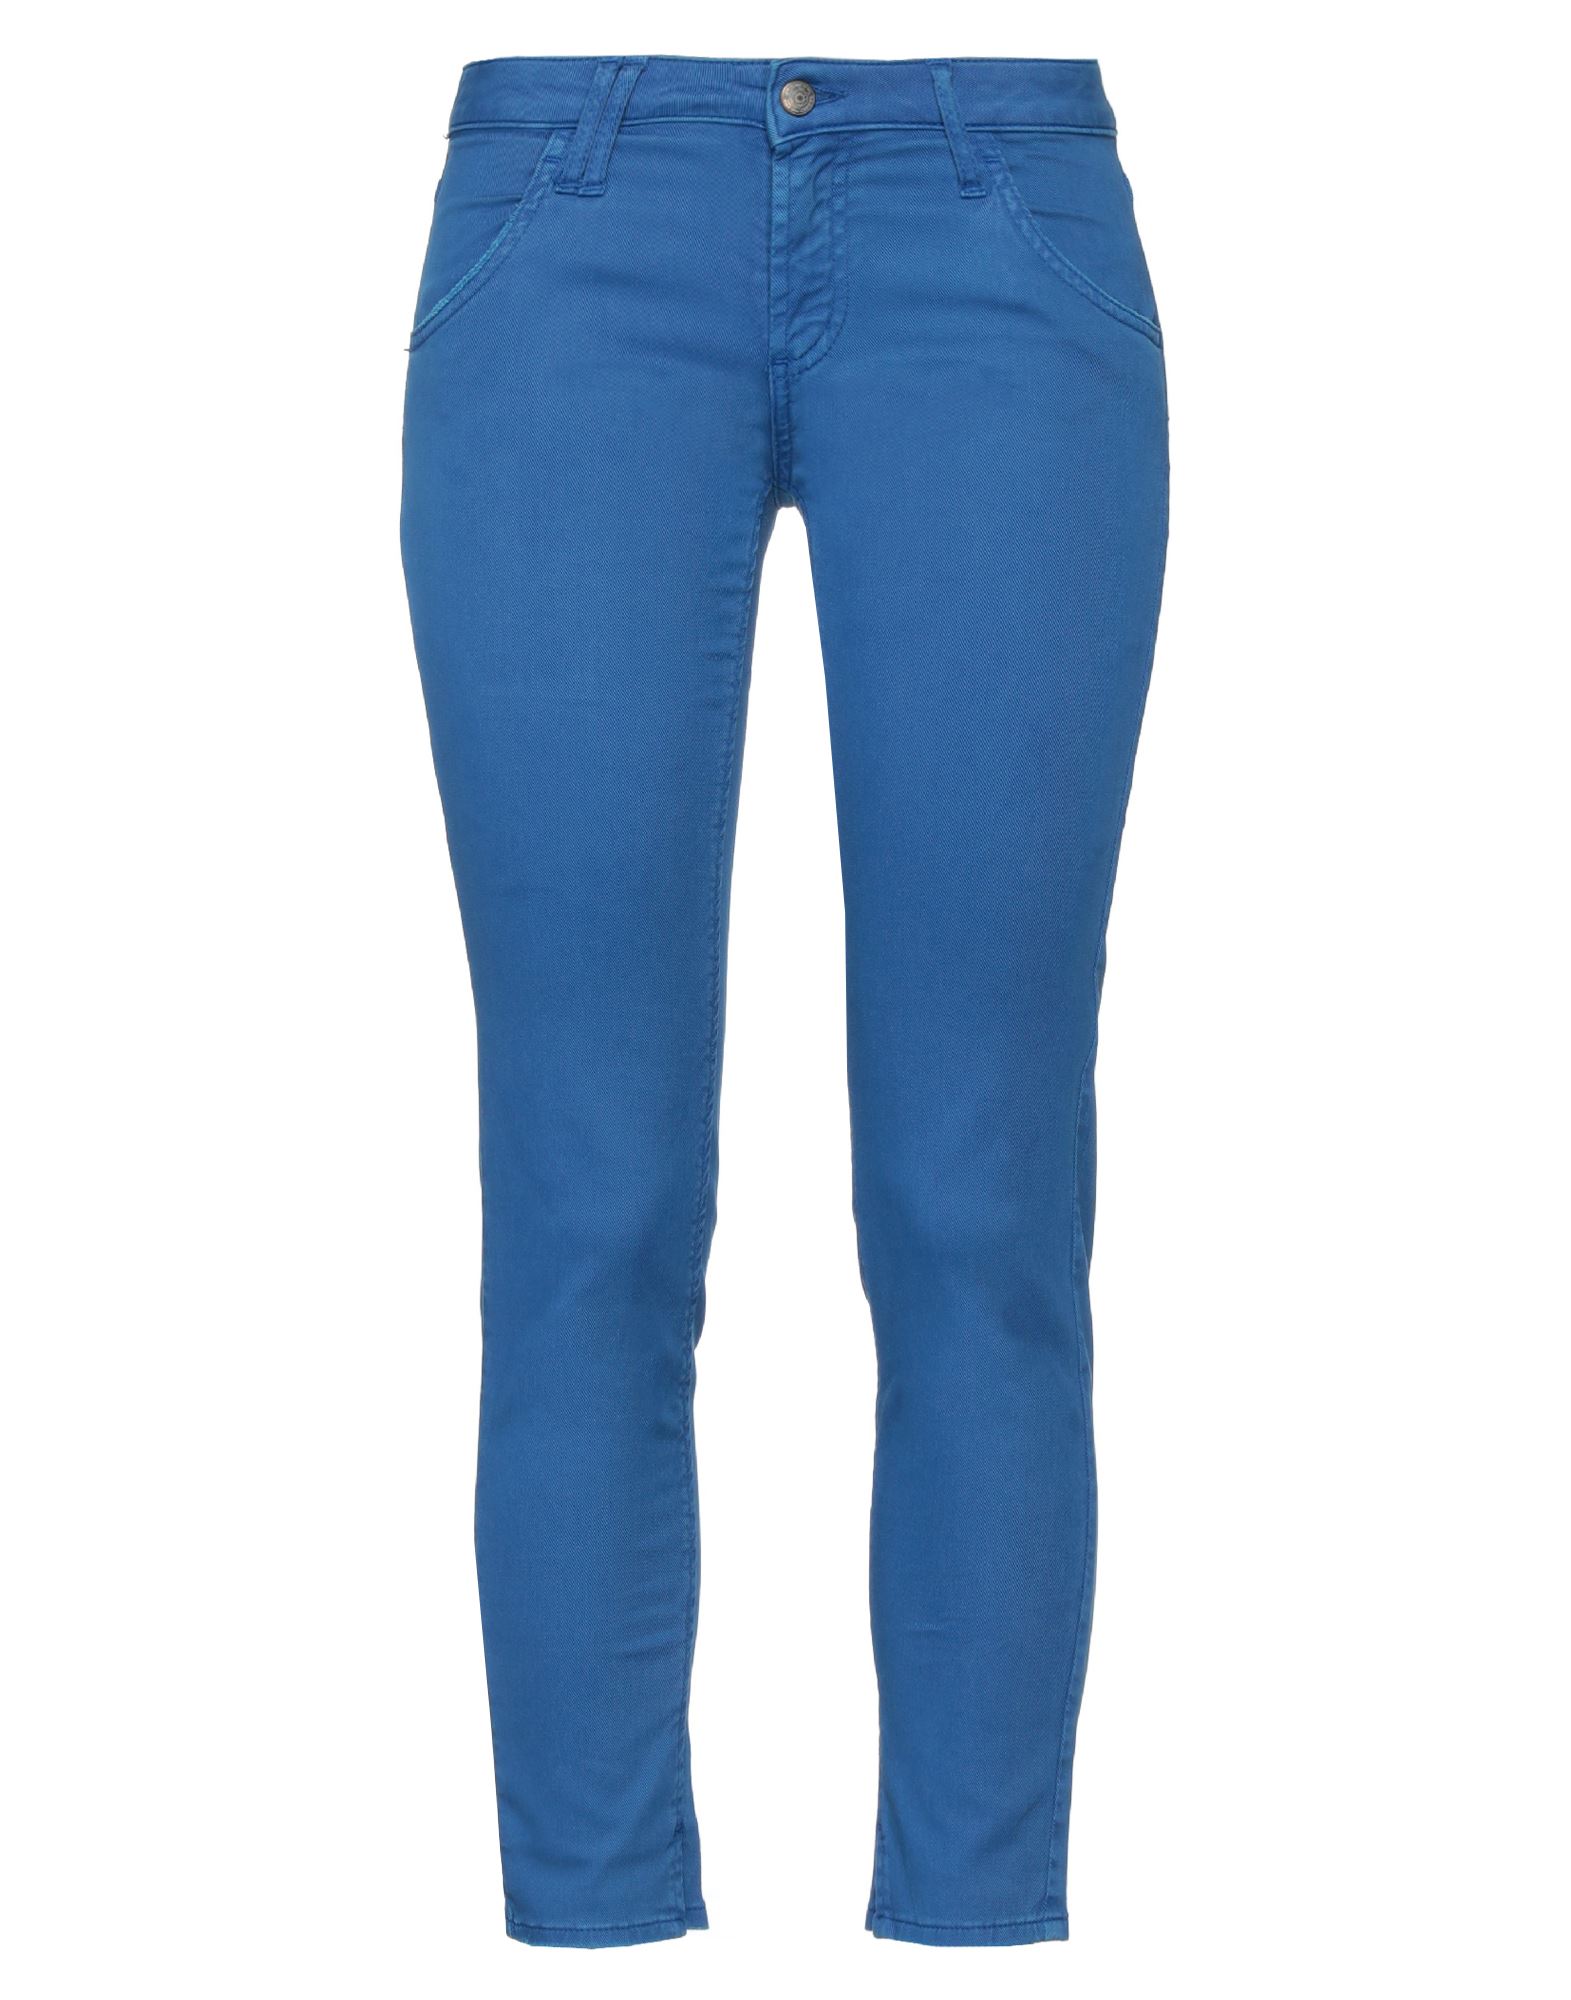 Roy Rogers Jeans In Bright Blue